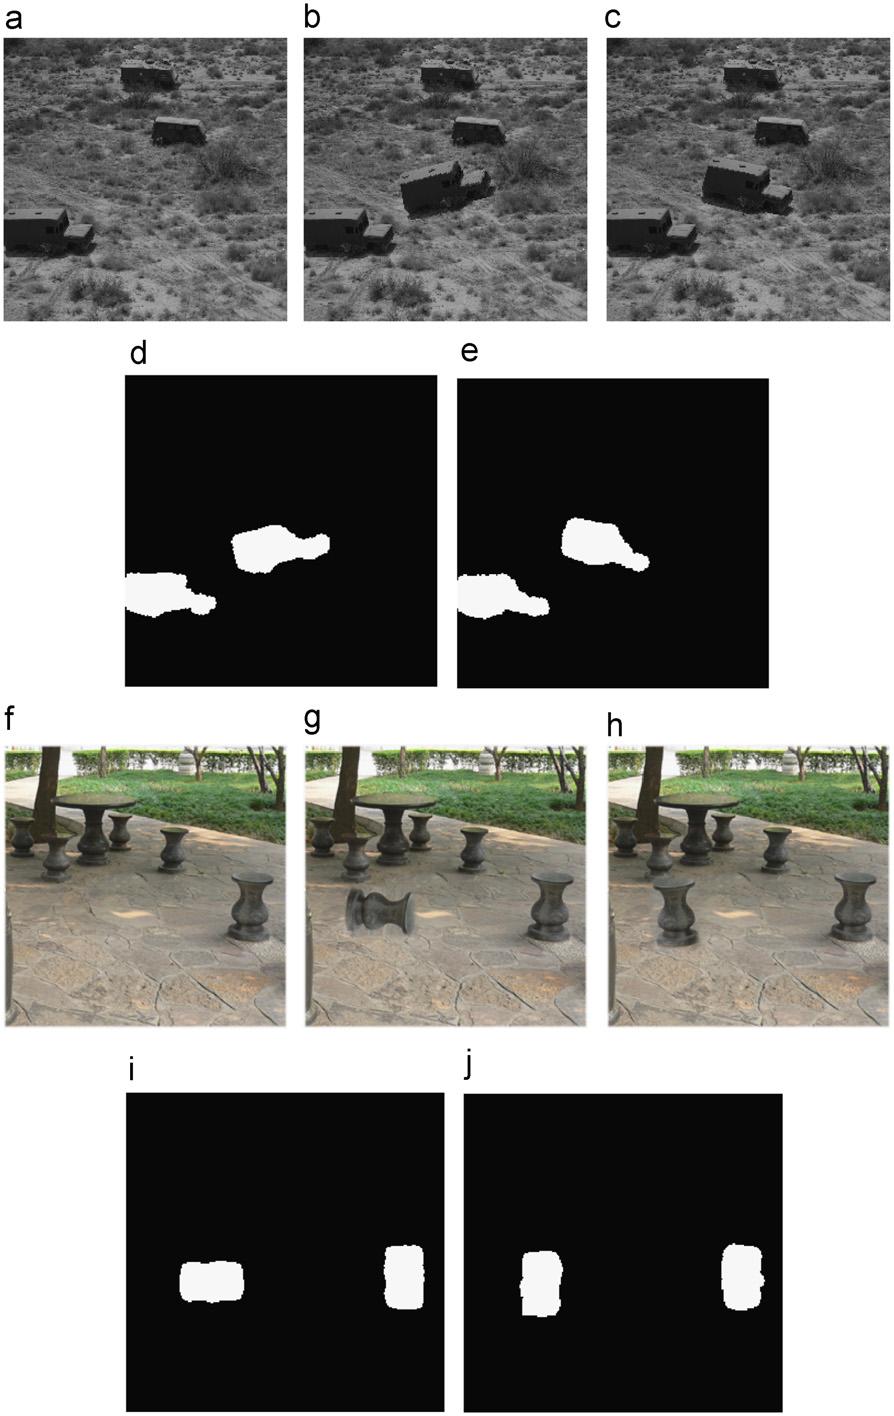 G. Liu et al. / Journal of Network and Computer Applications 34 (2011) 1557 1565 1563 Fig. 9. Test under Gaussian blurring:(a) d 2 ¼1, (b) d 2 ¼2 and (c) d 2 ¼3. Fig. 10.